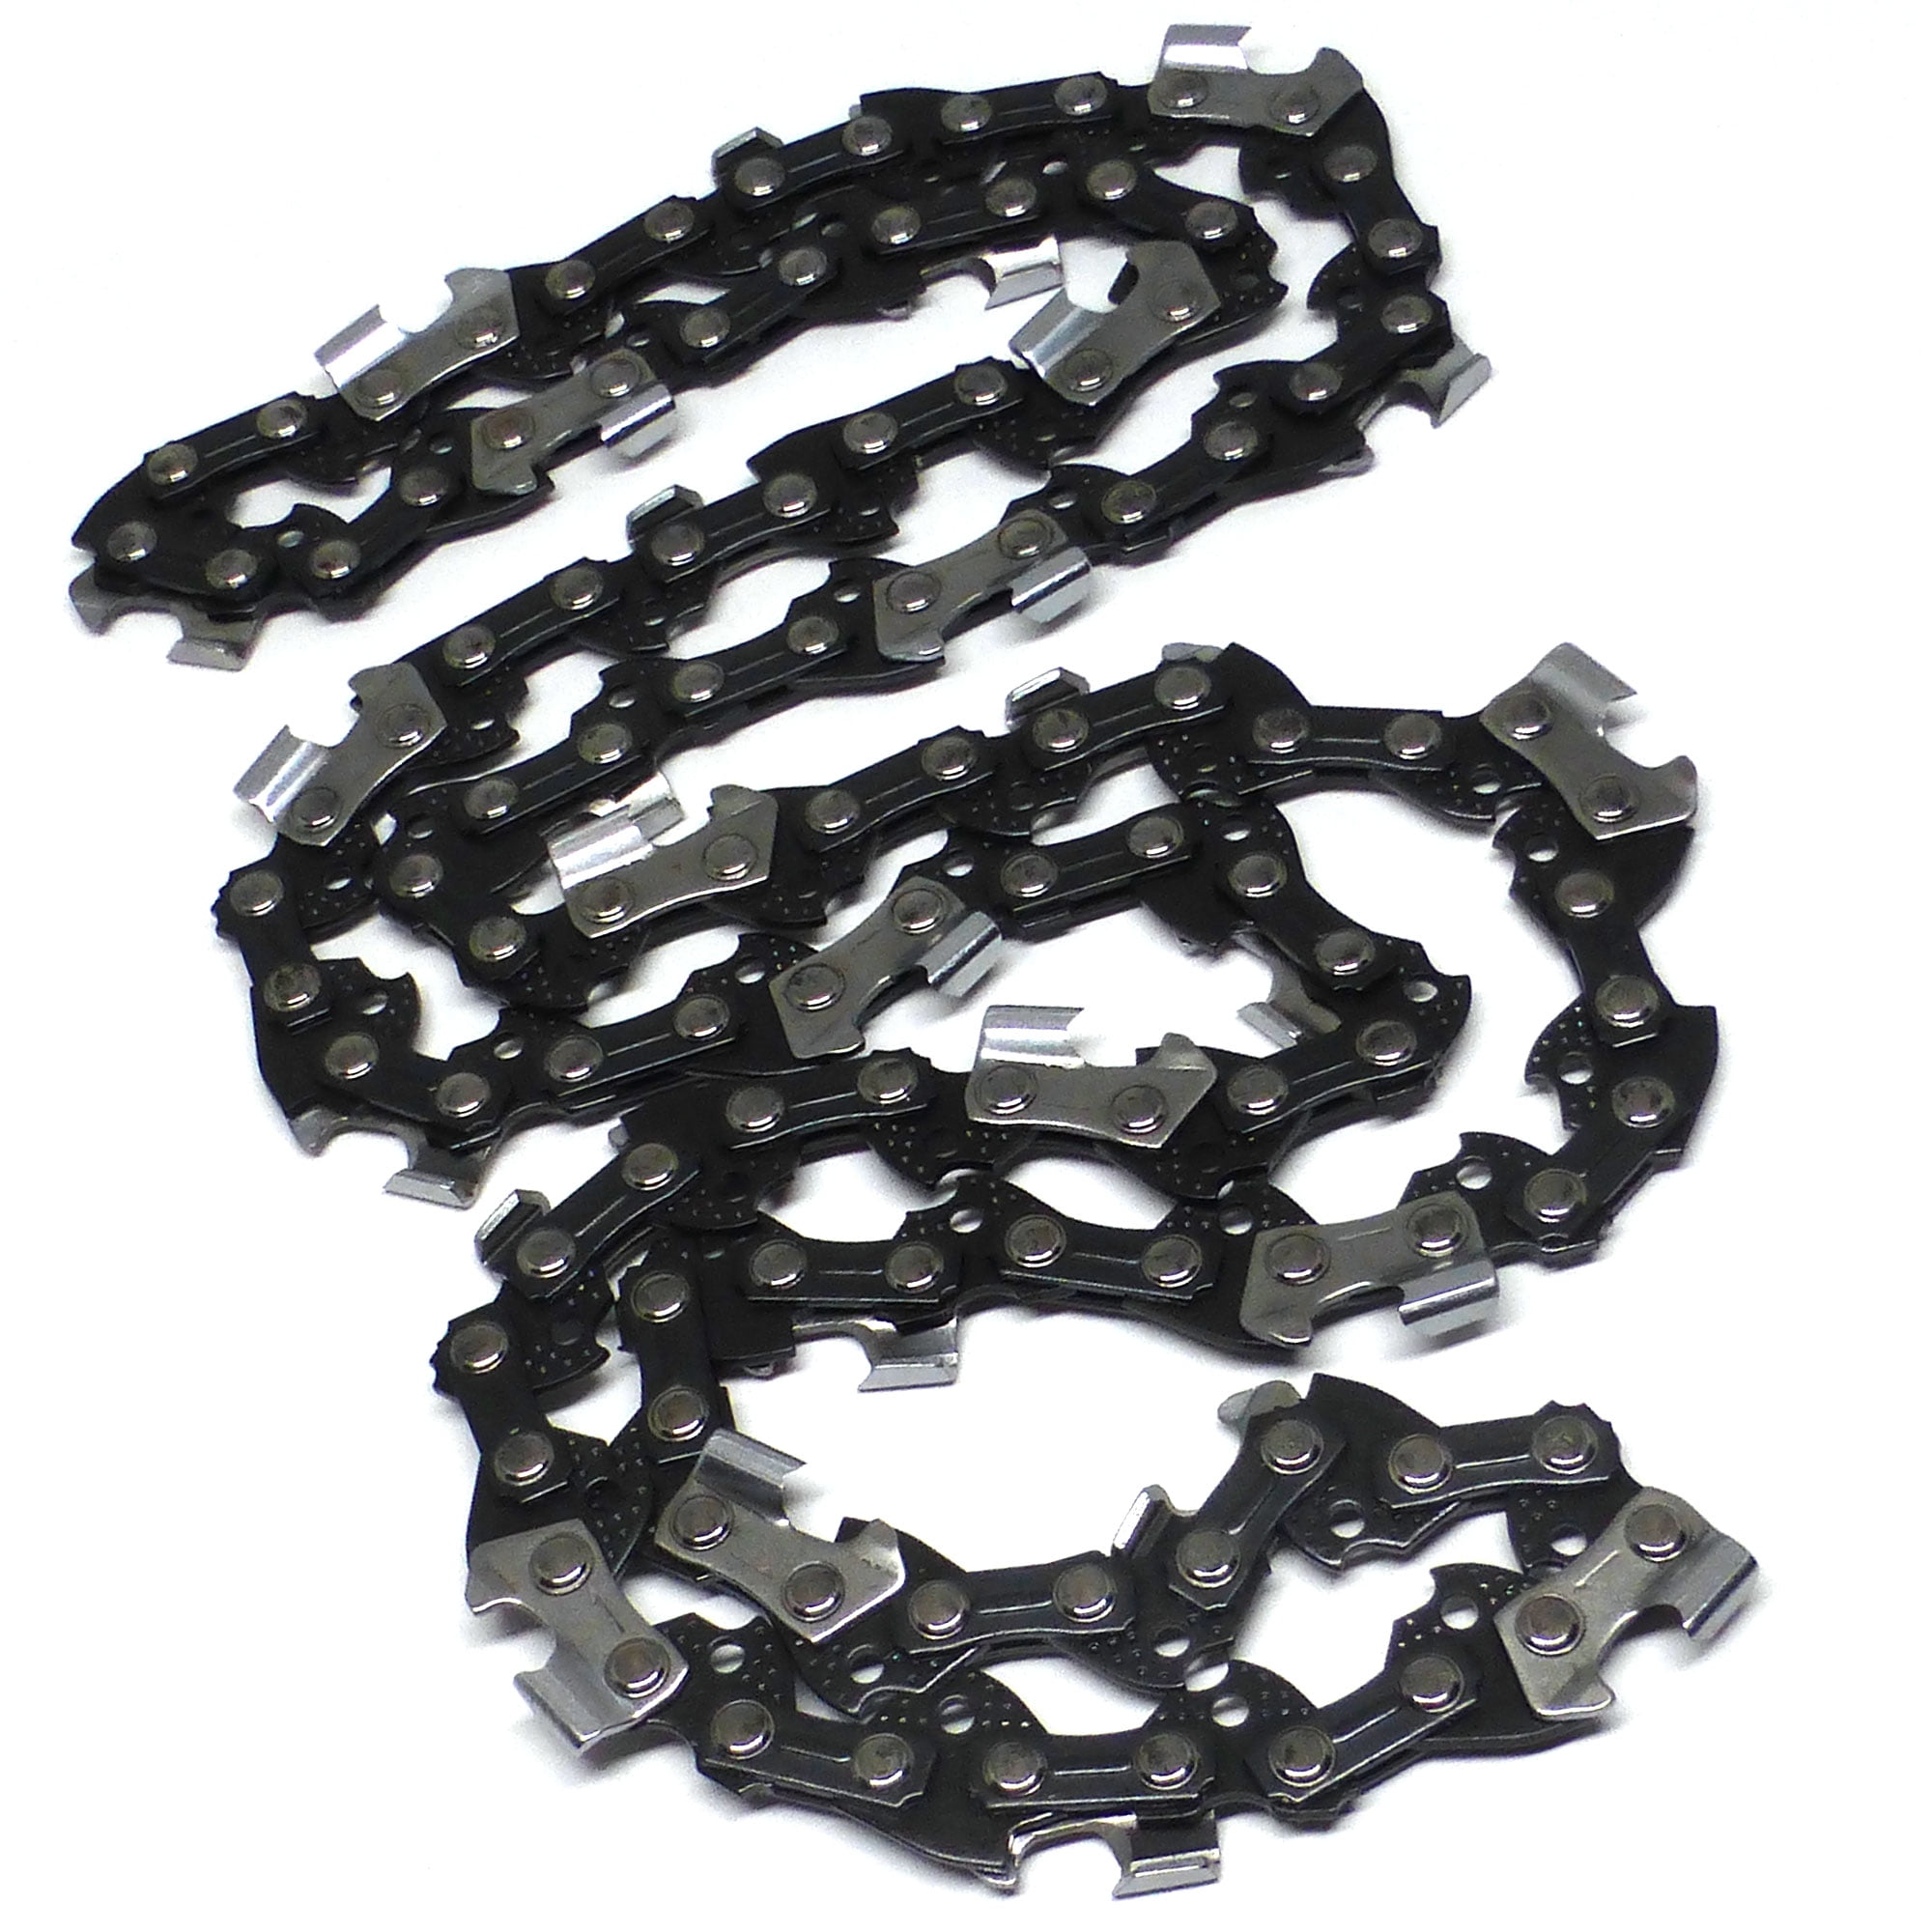 16" Chainsaw Chain FULL CHISEL 3/8LP-050-55DL for Stihl 009 010 017 MS181 MS210 